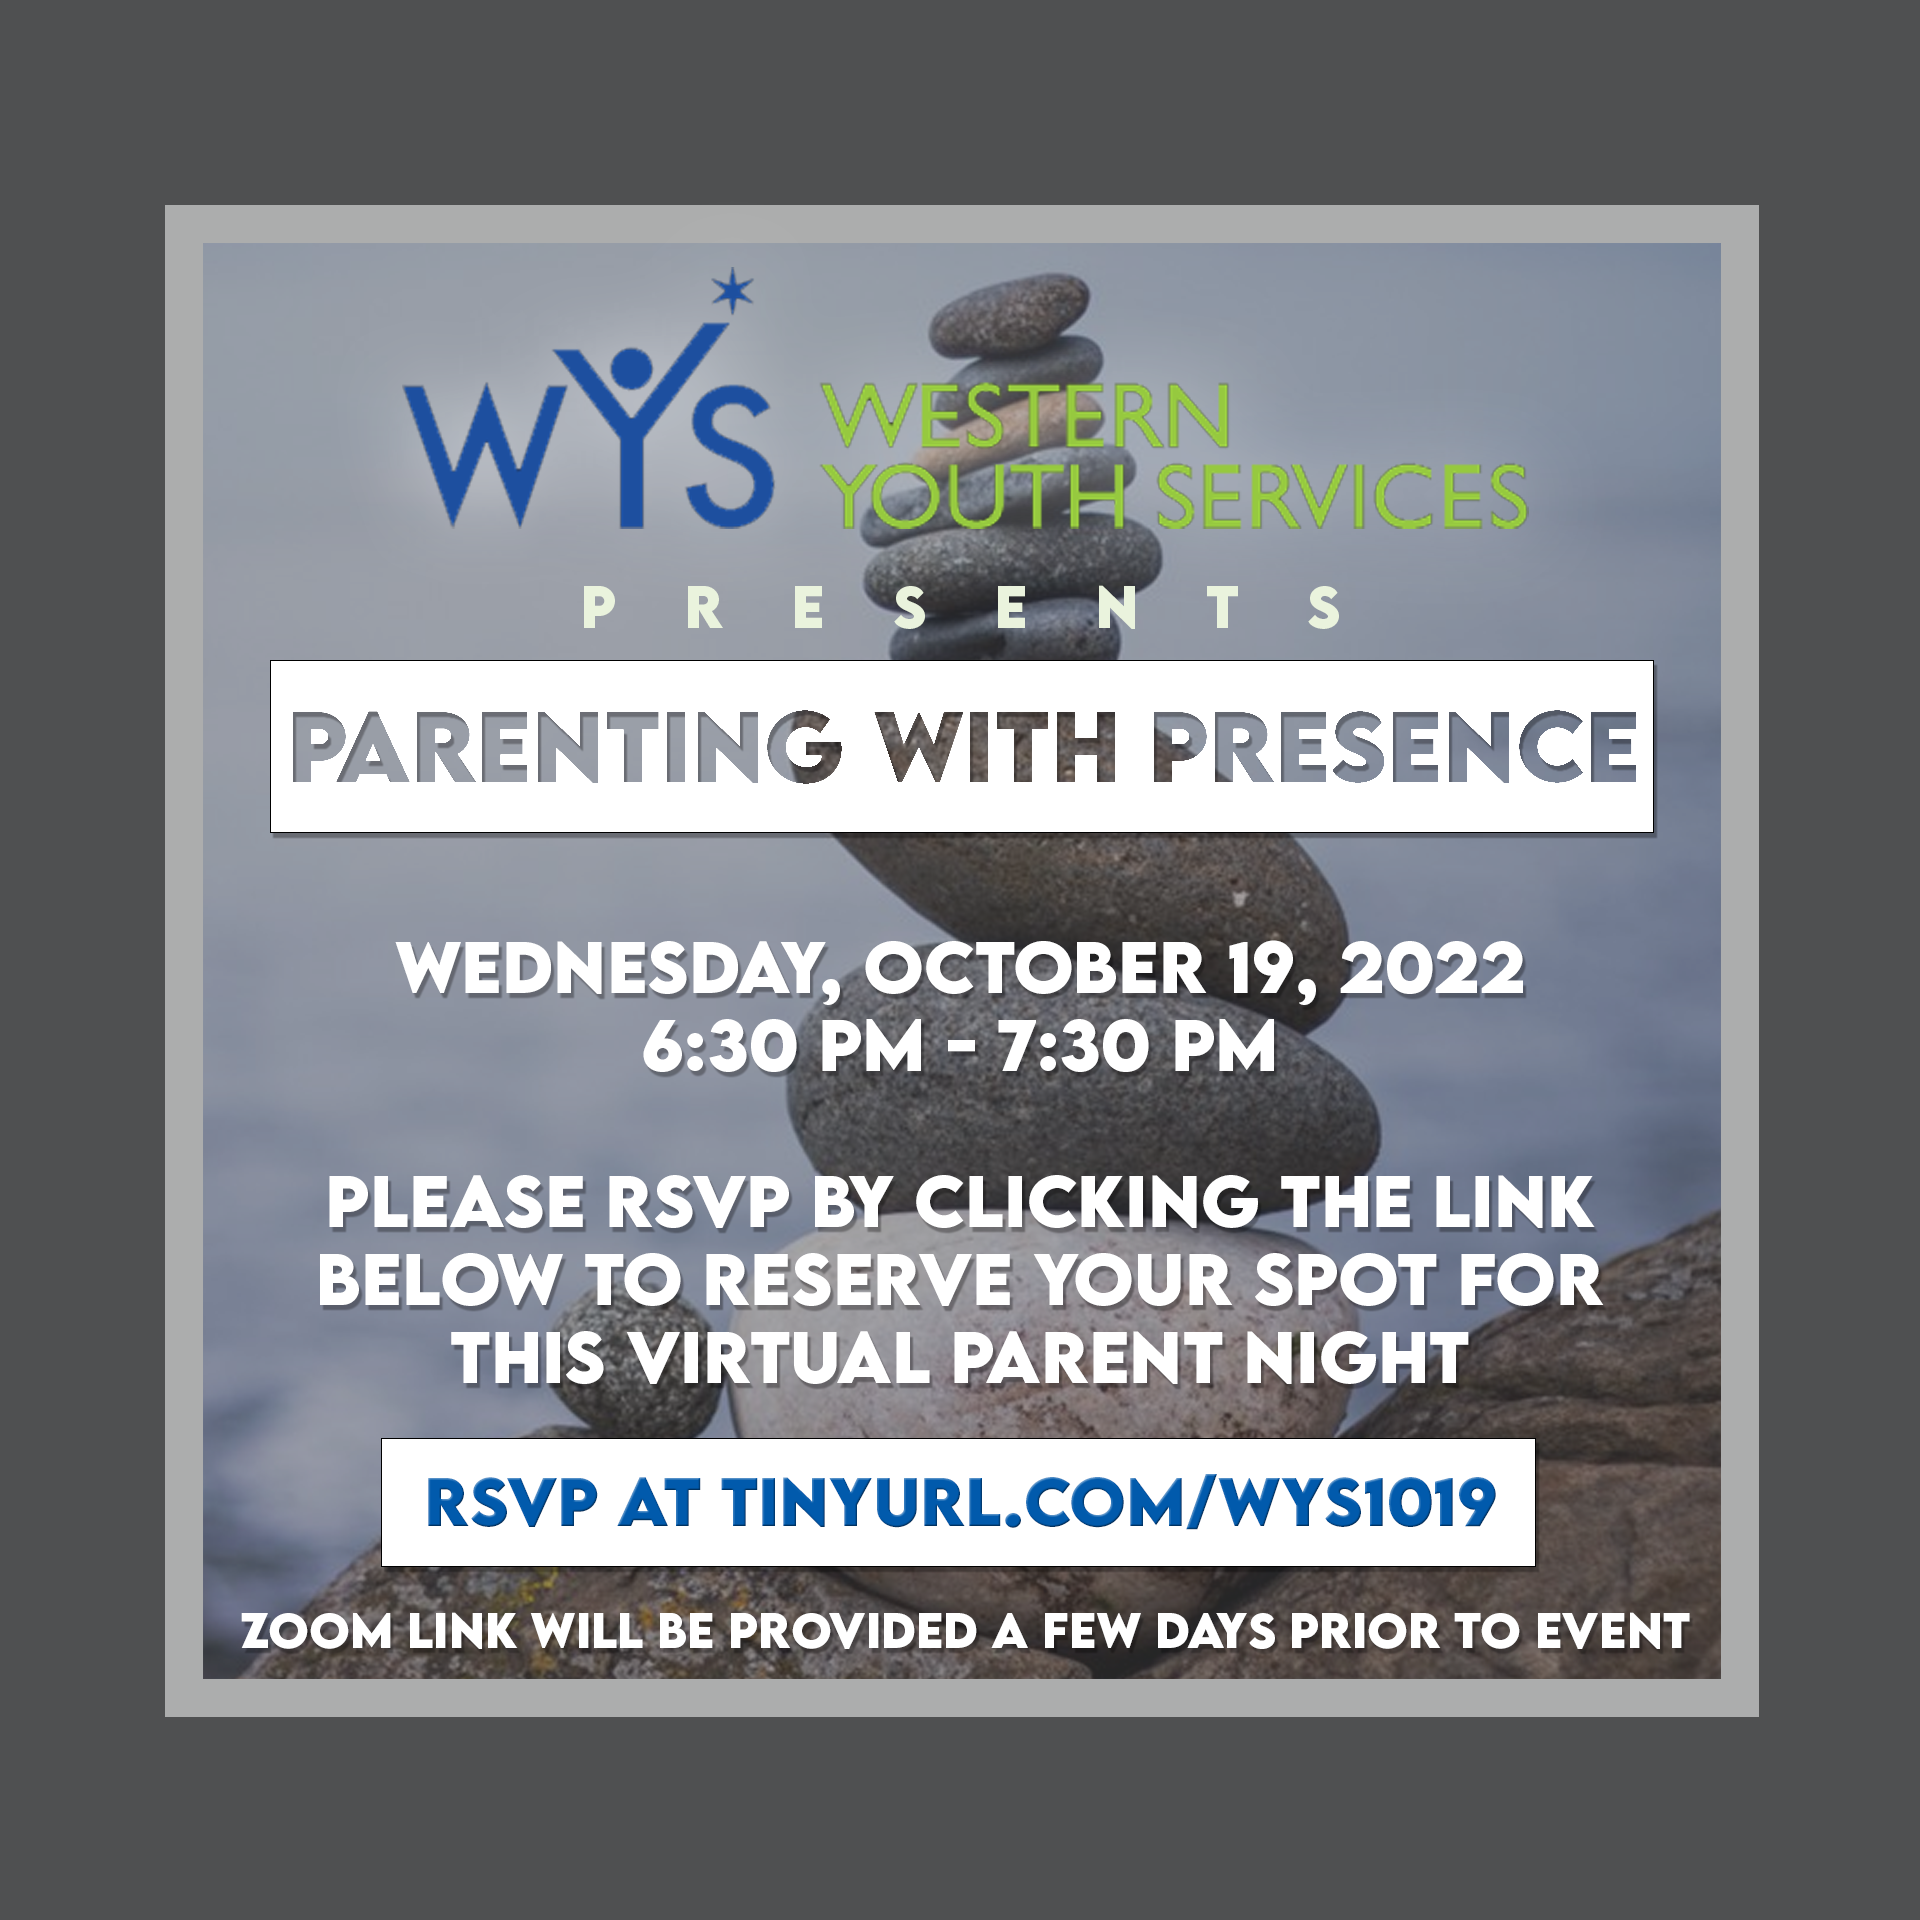 Invitation to Parenting with Presence presented by Western Youth Services via Zoom